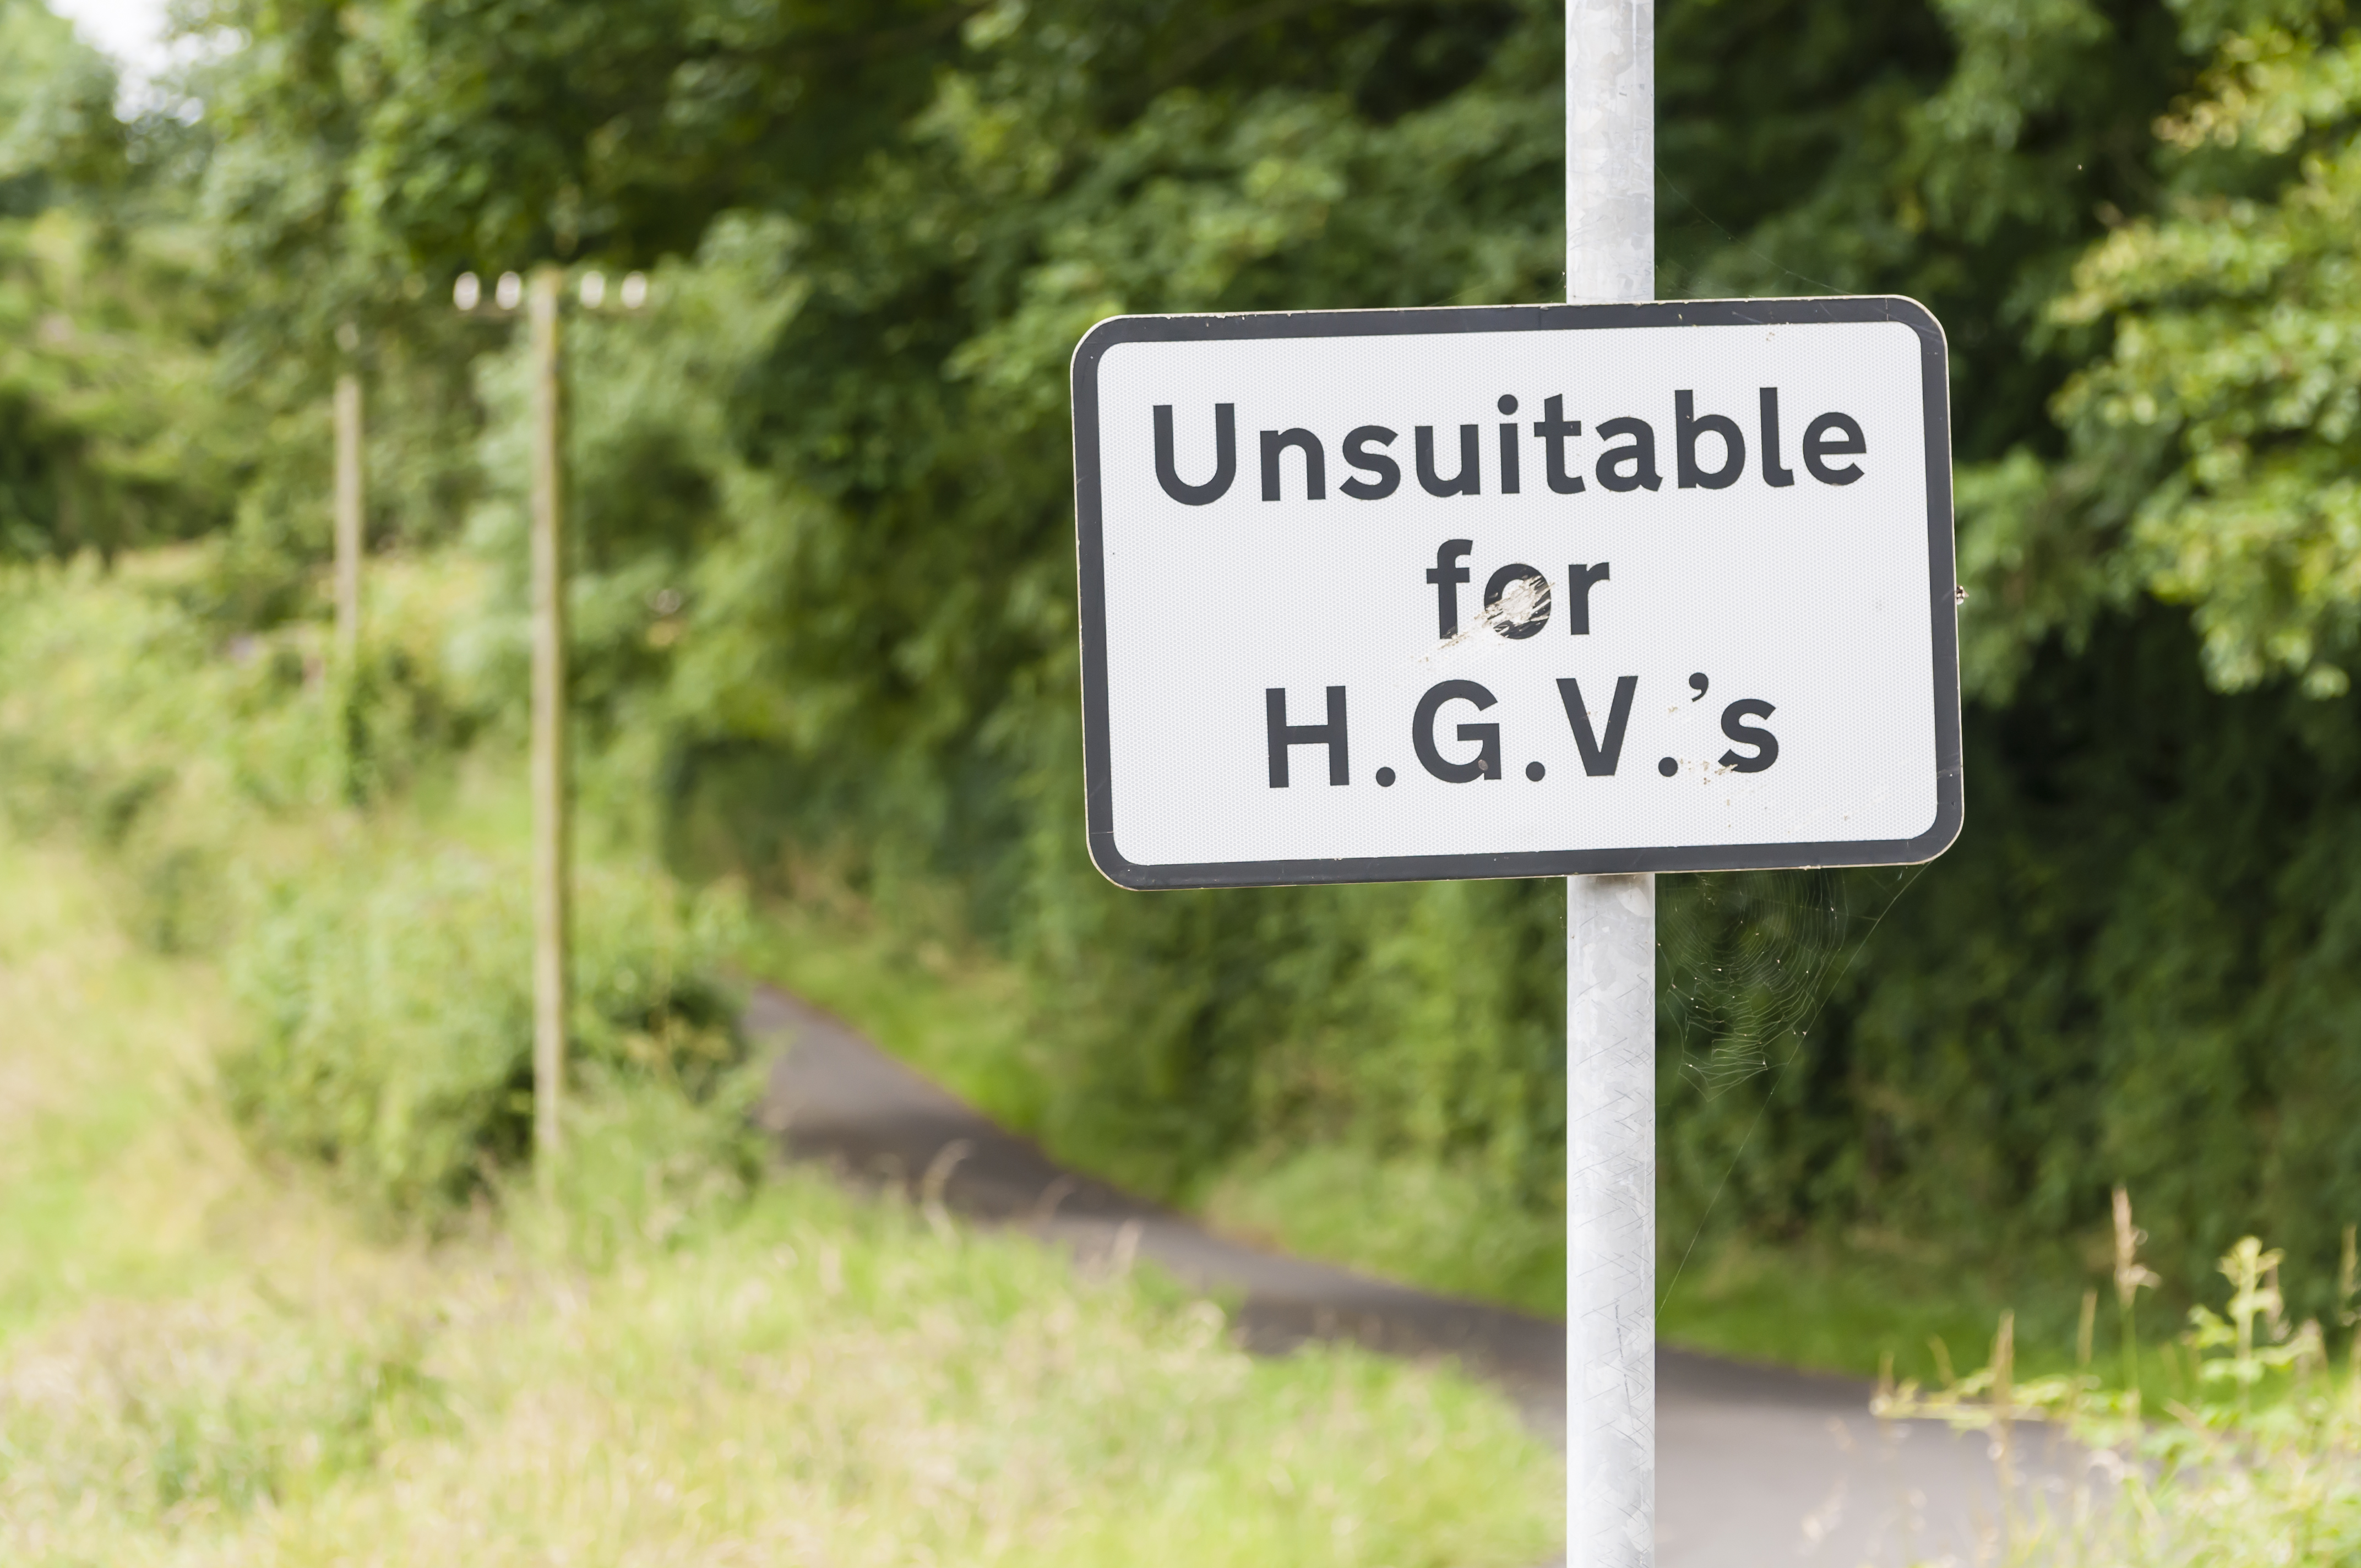 Sign warning that the road is unsuitable for heavy goods vehicles, with an unnecessary apostrophe. (Stephen Barnes / Getty Images)